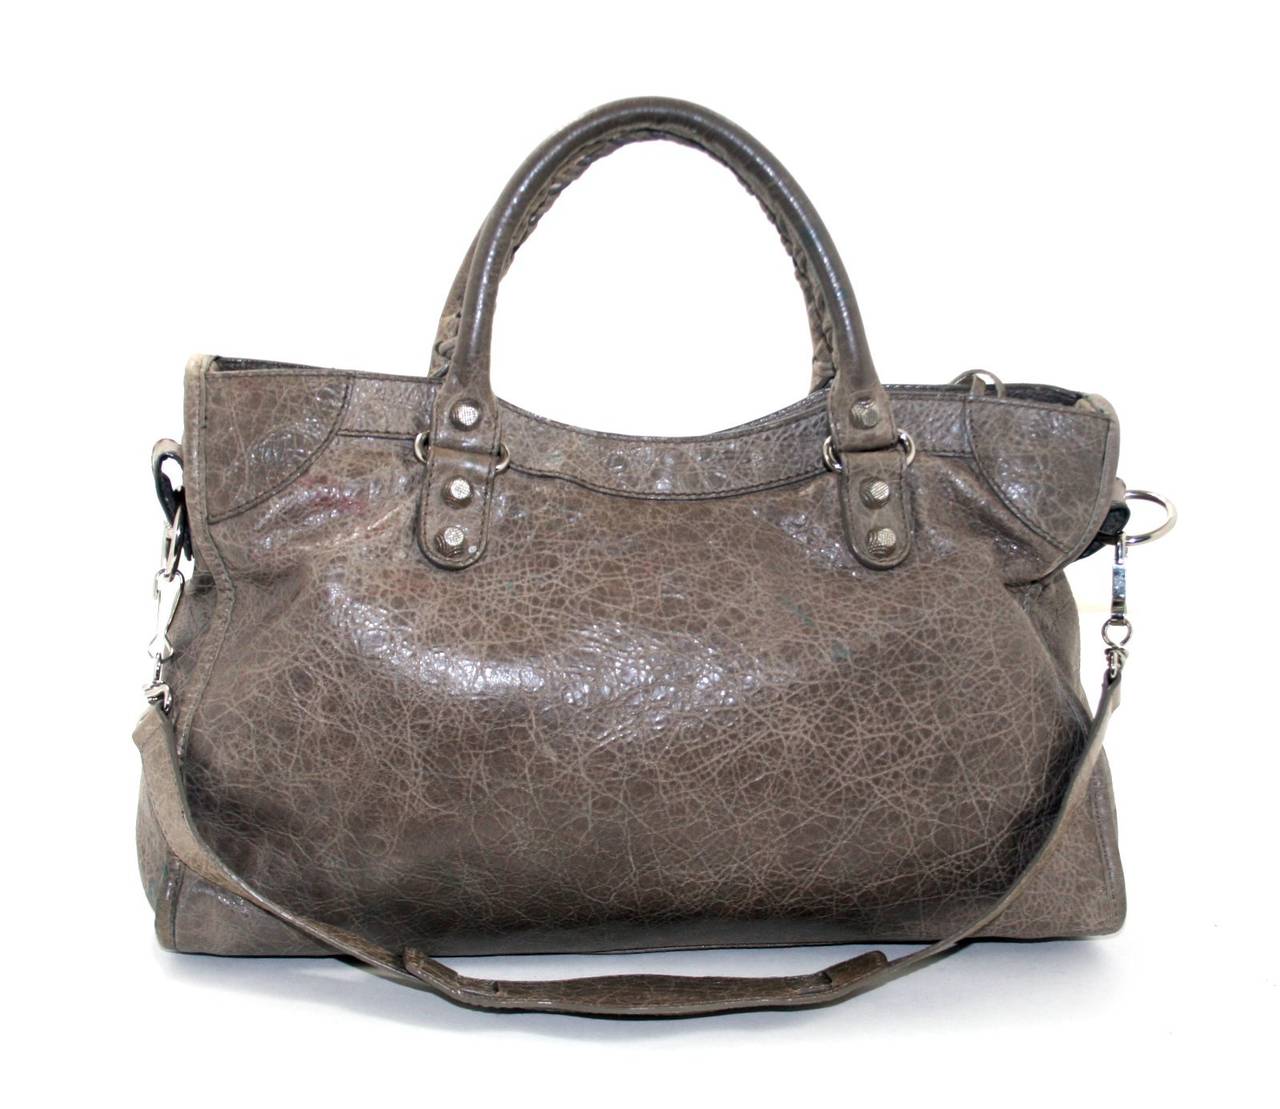 In very good condition, this Balenciaga Taupe Lambskin Arena Giant 12 City Bag  is a fantastic find.   There are some light signs of prior ownership:  slight wear on the edges and several green and red markings that can be seen in our photos. 